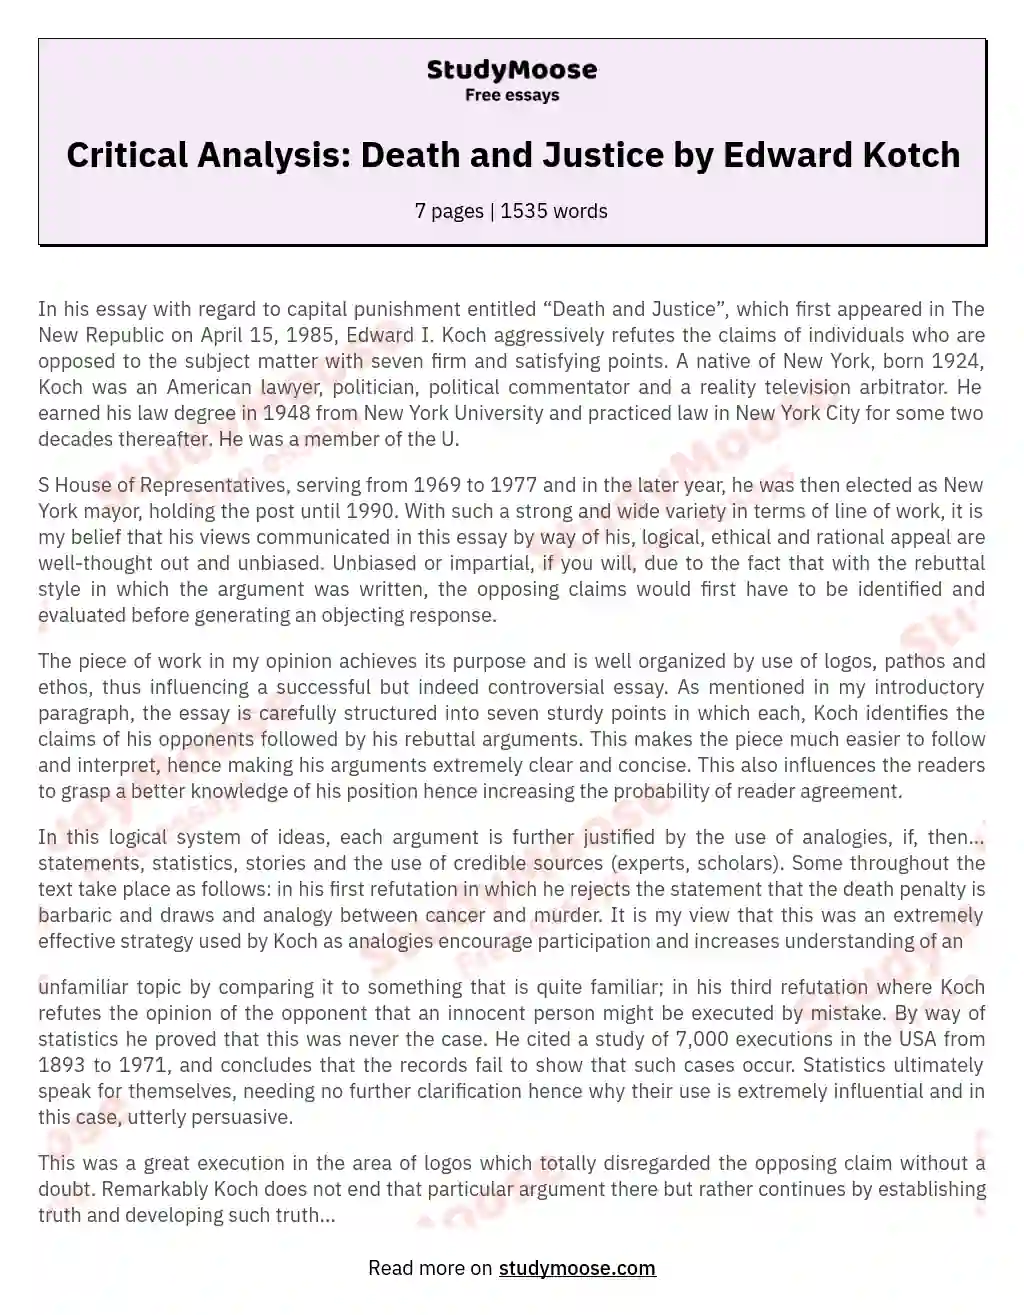 Critical Analysis: Death and Justice by Edward Kotch essay